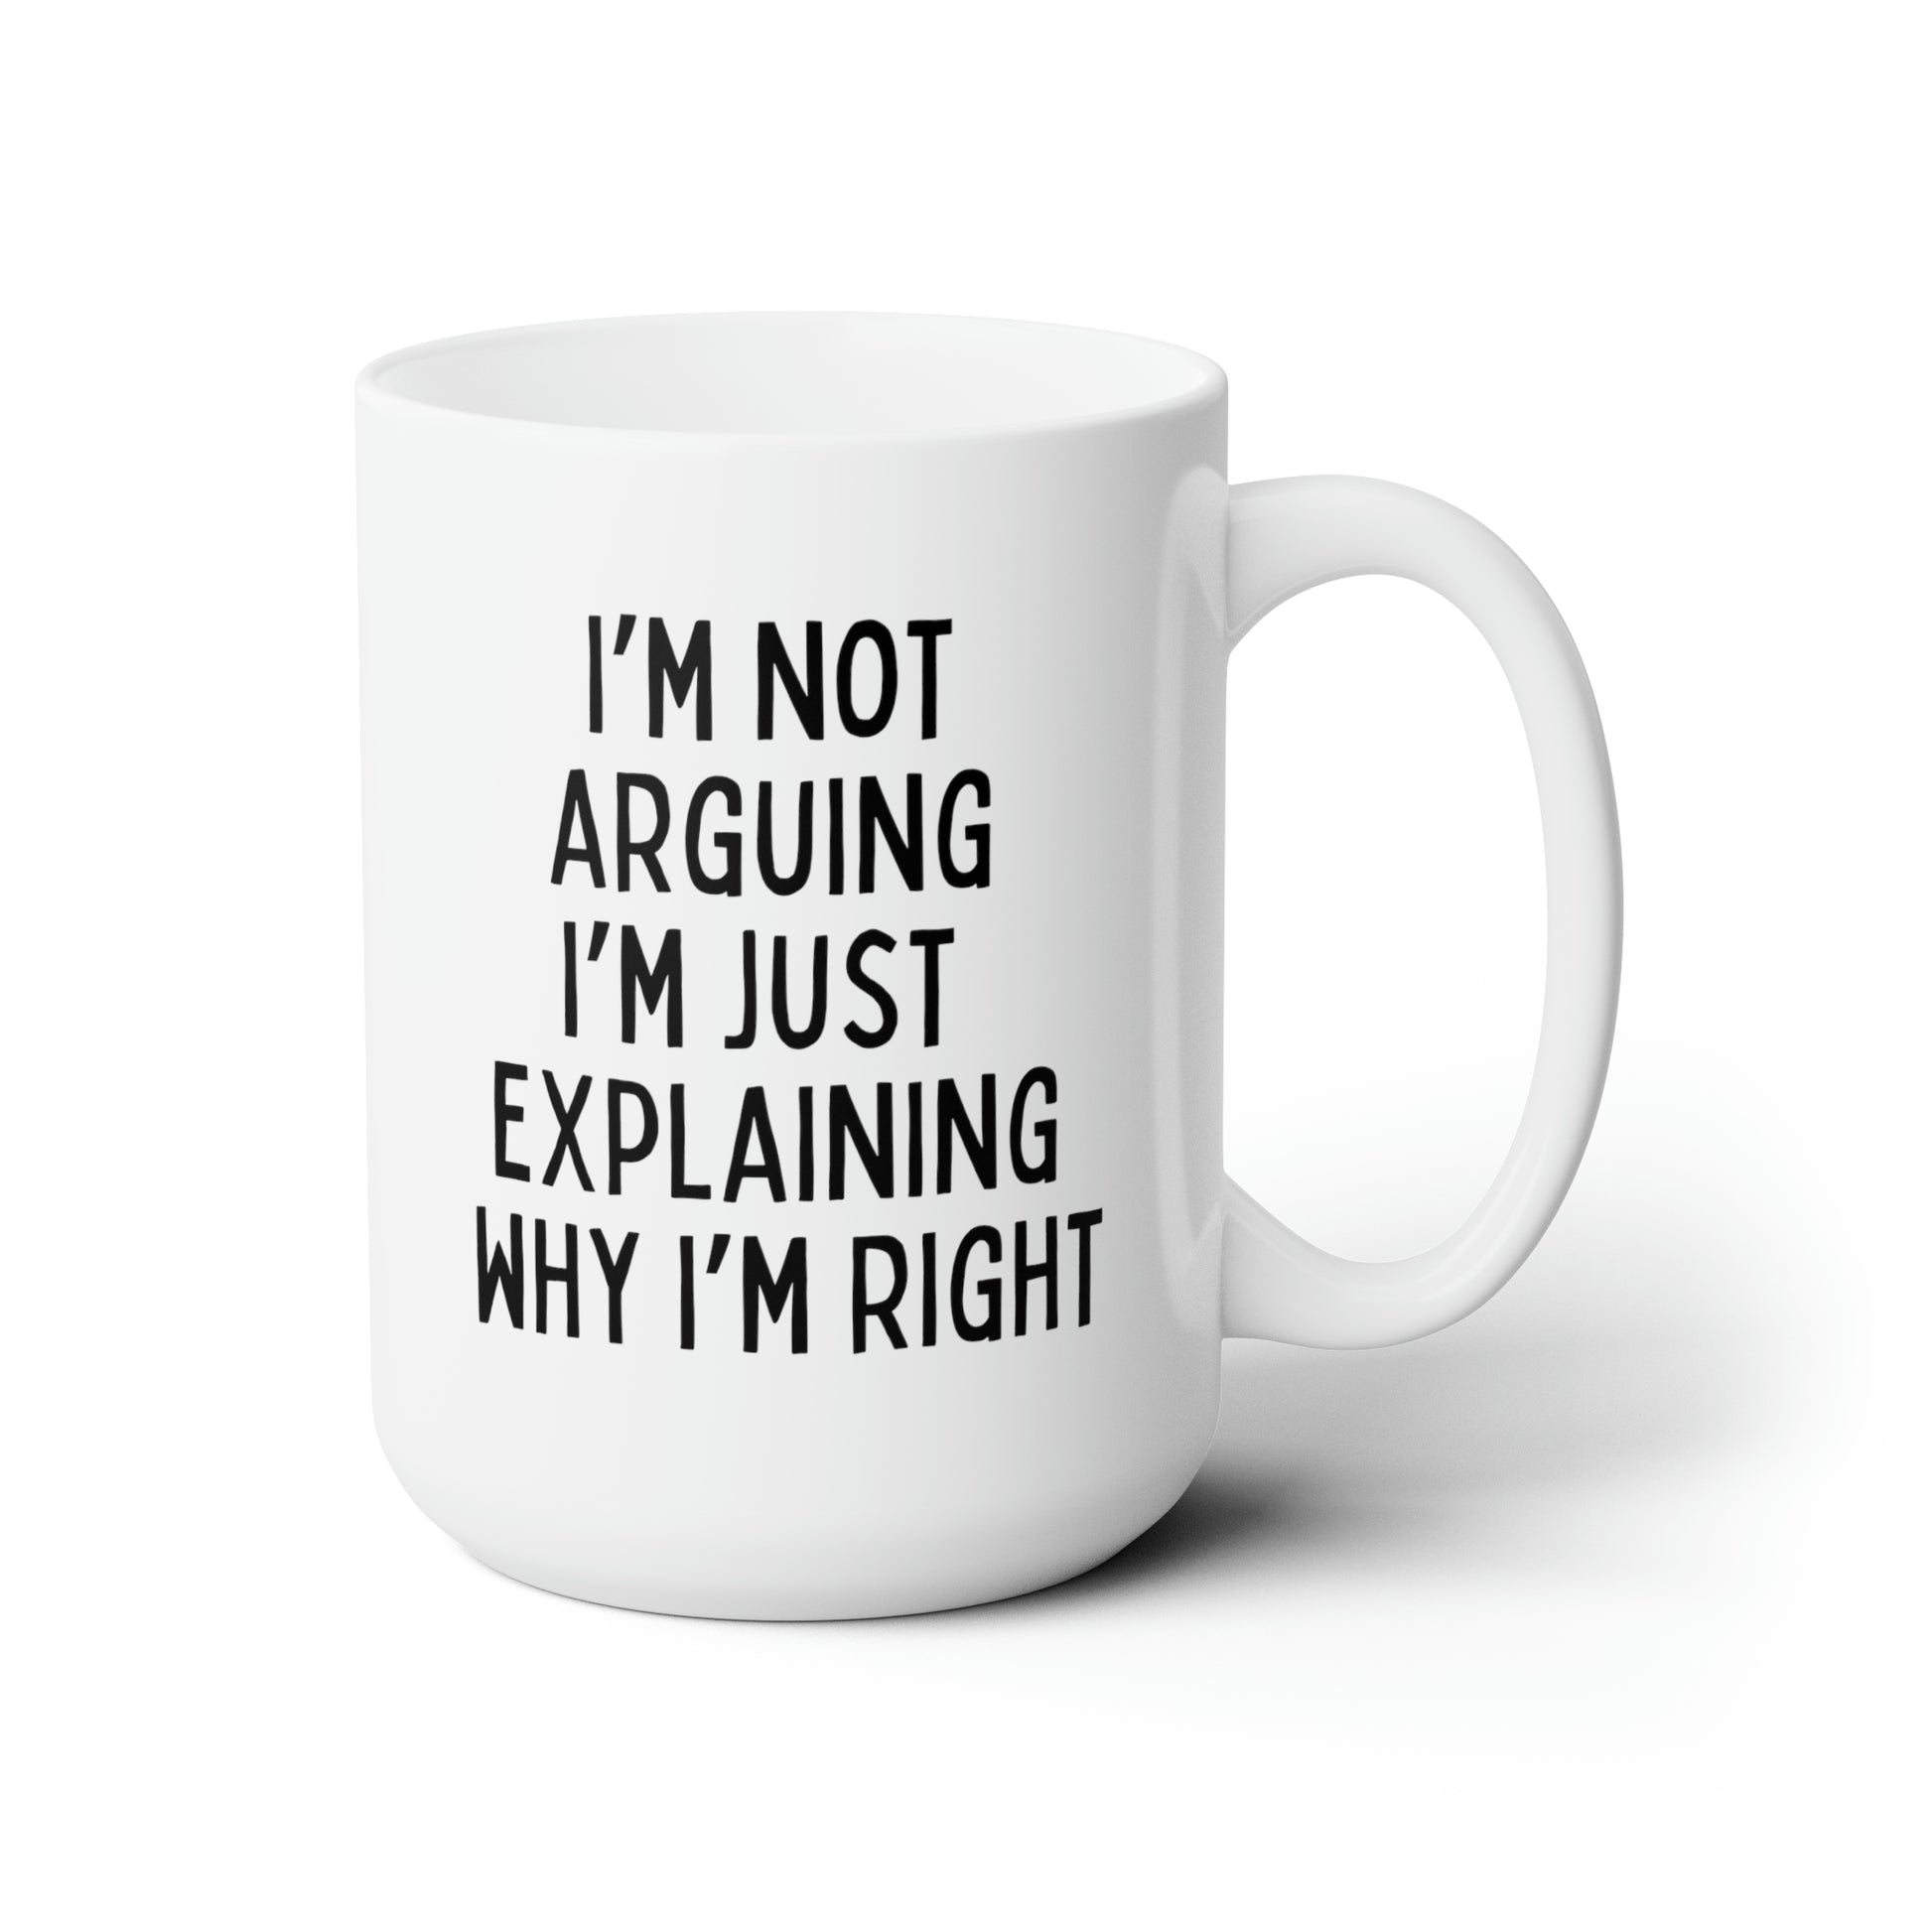 I'm Not Arguing I'm Just Explaining Why I'm Right 15oz white funny large coffee mug gift for birthday christmas sarcastic sassy snarky tea cup waveywares wavey wares wavywares wavy wares